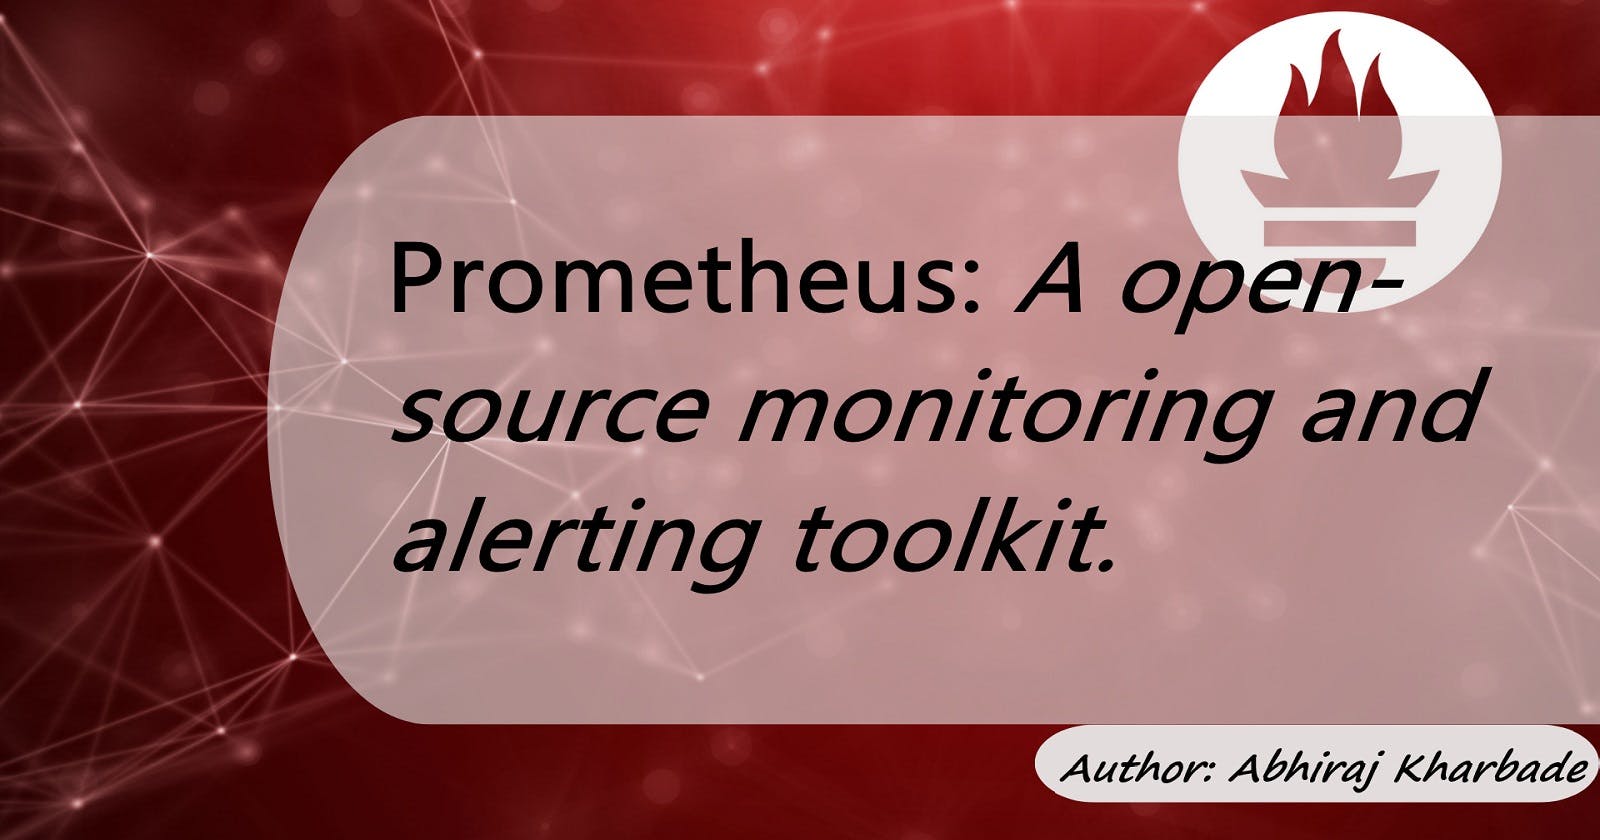 Prometheus: A open-source monitoring and alerting toolkit.